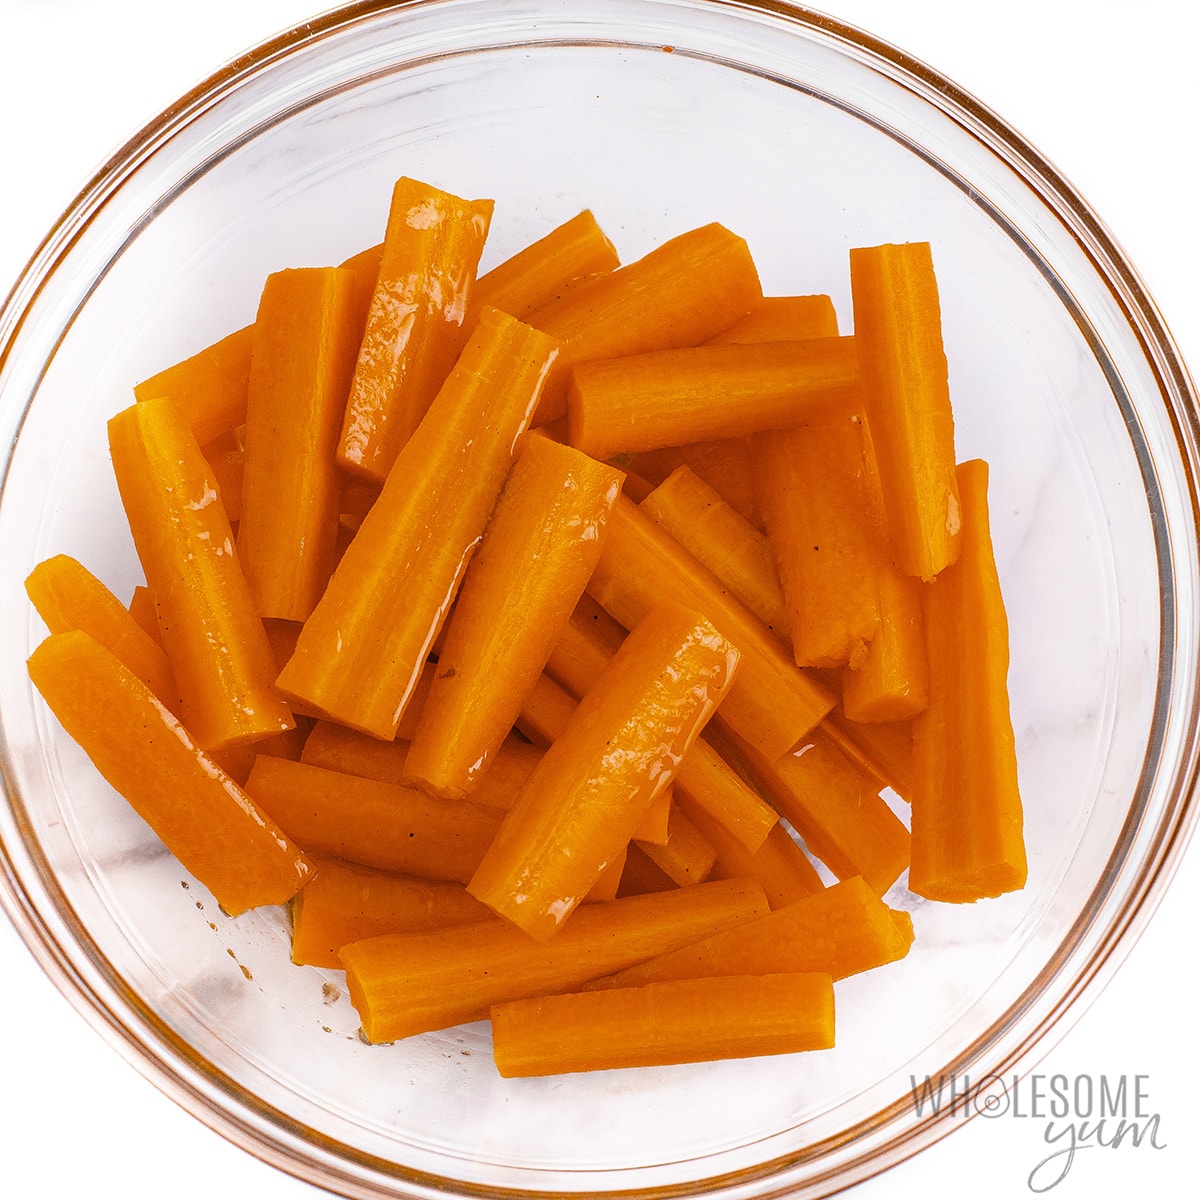 Carrots tossed in marinade.